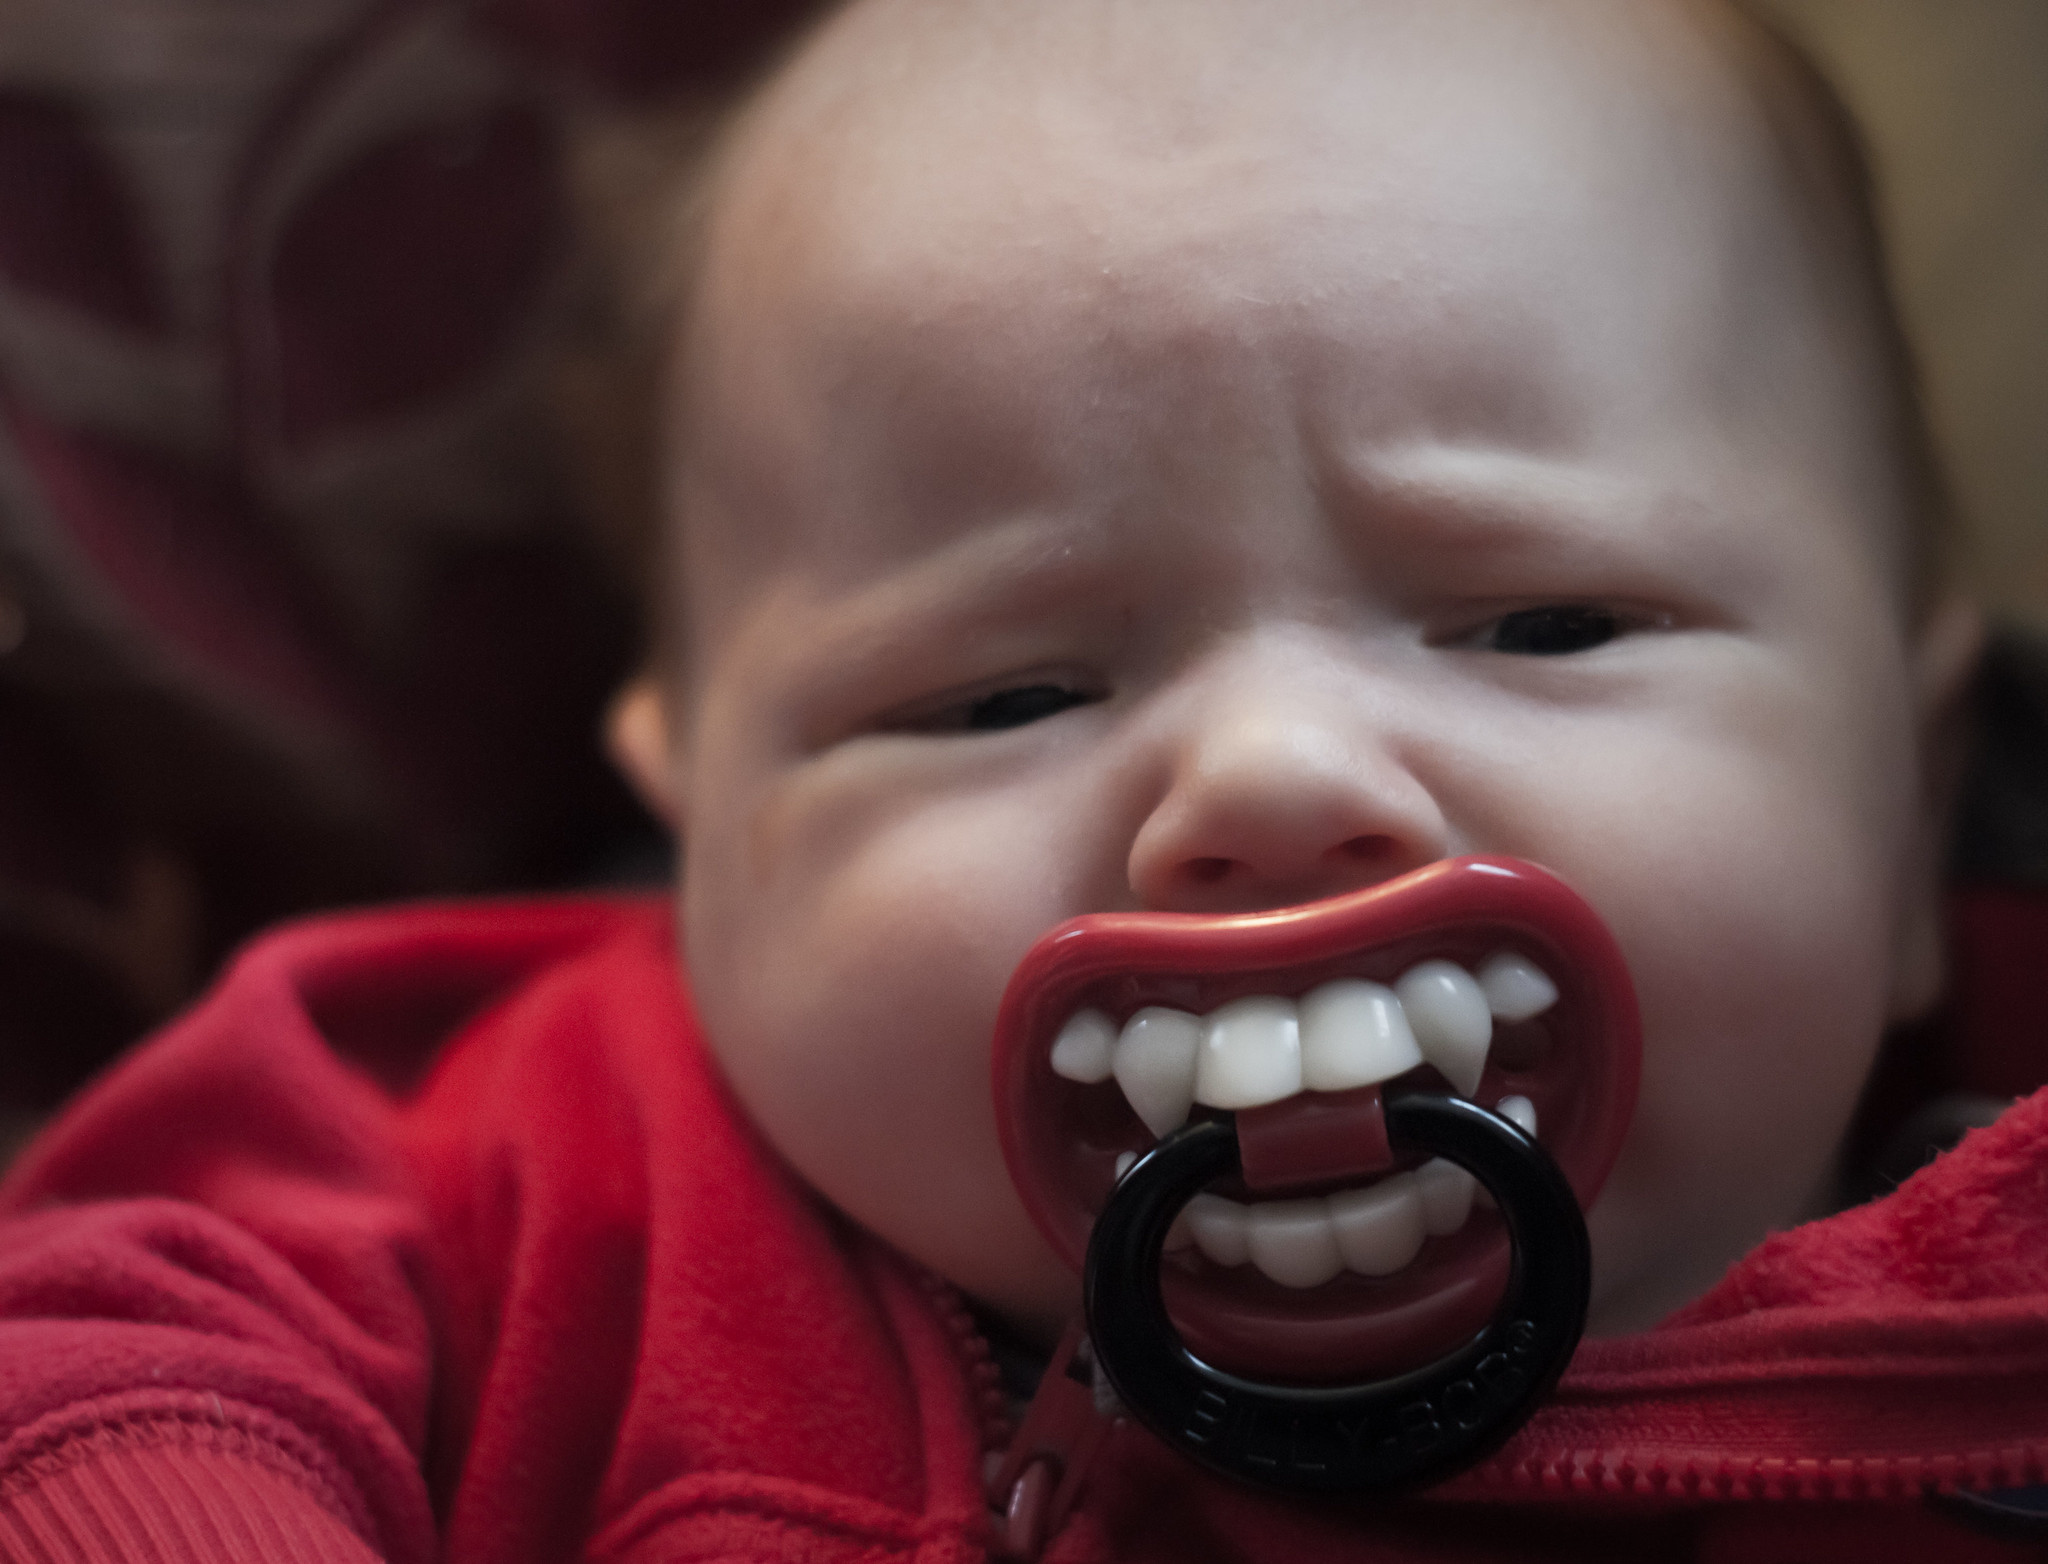 This baby has a fang shaped pacifier - or does he?